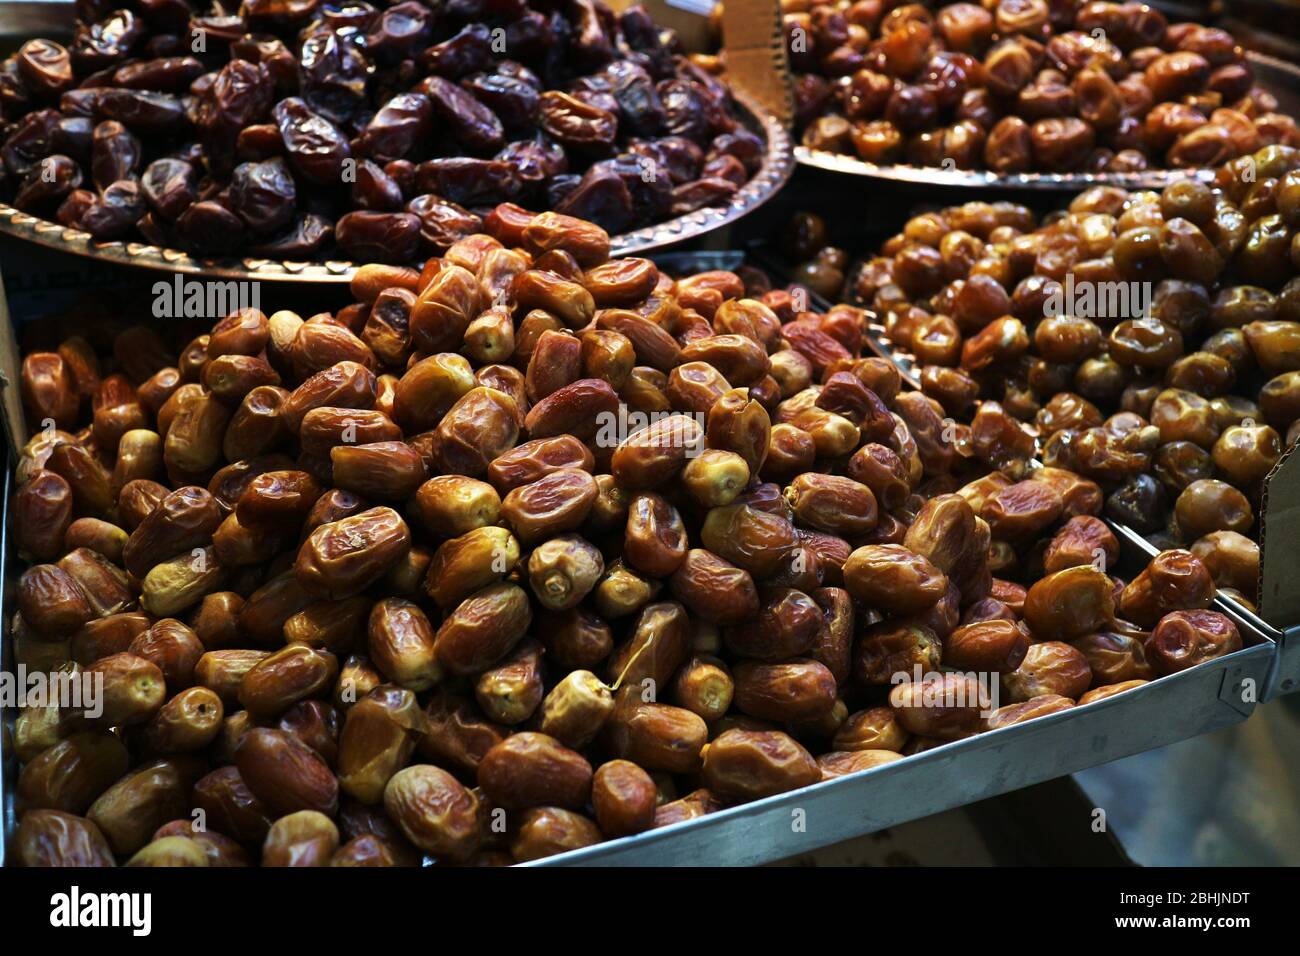 Dates on display in open air market Stock Photo